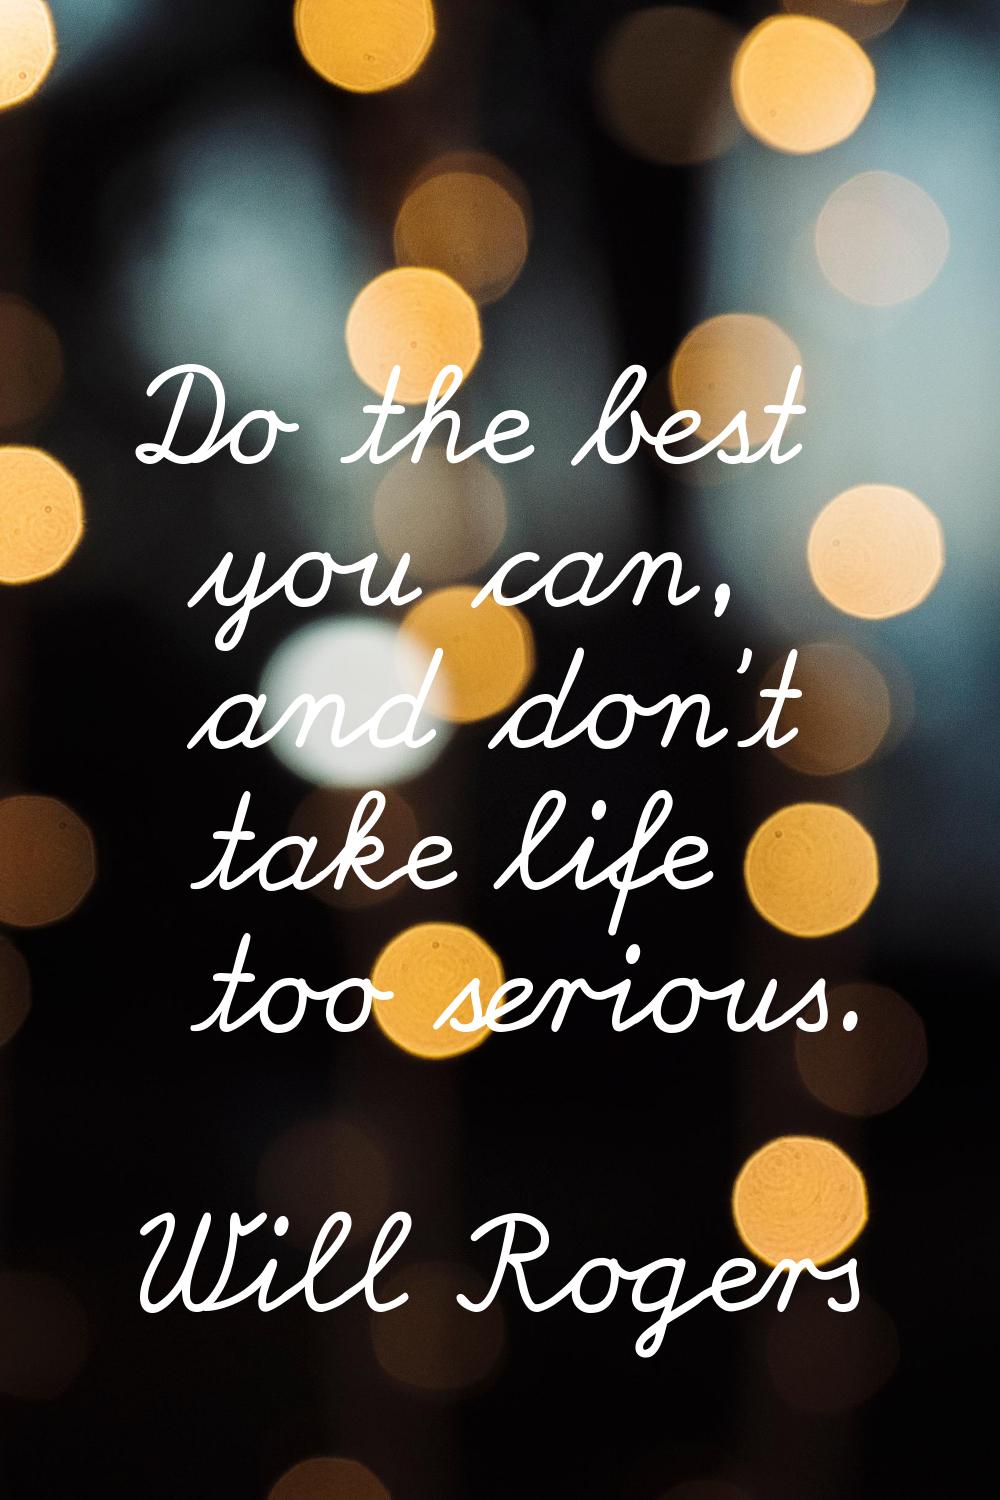 Do the best you can, and don't take life too serious.